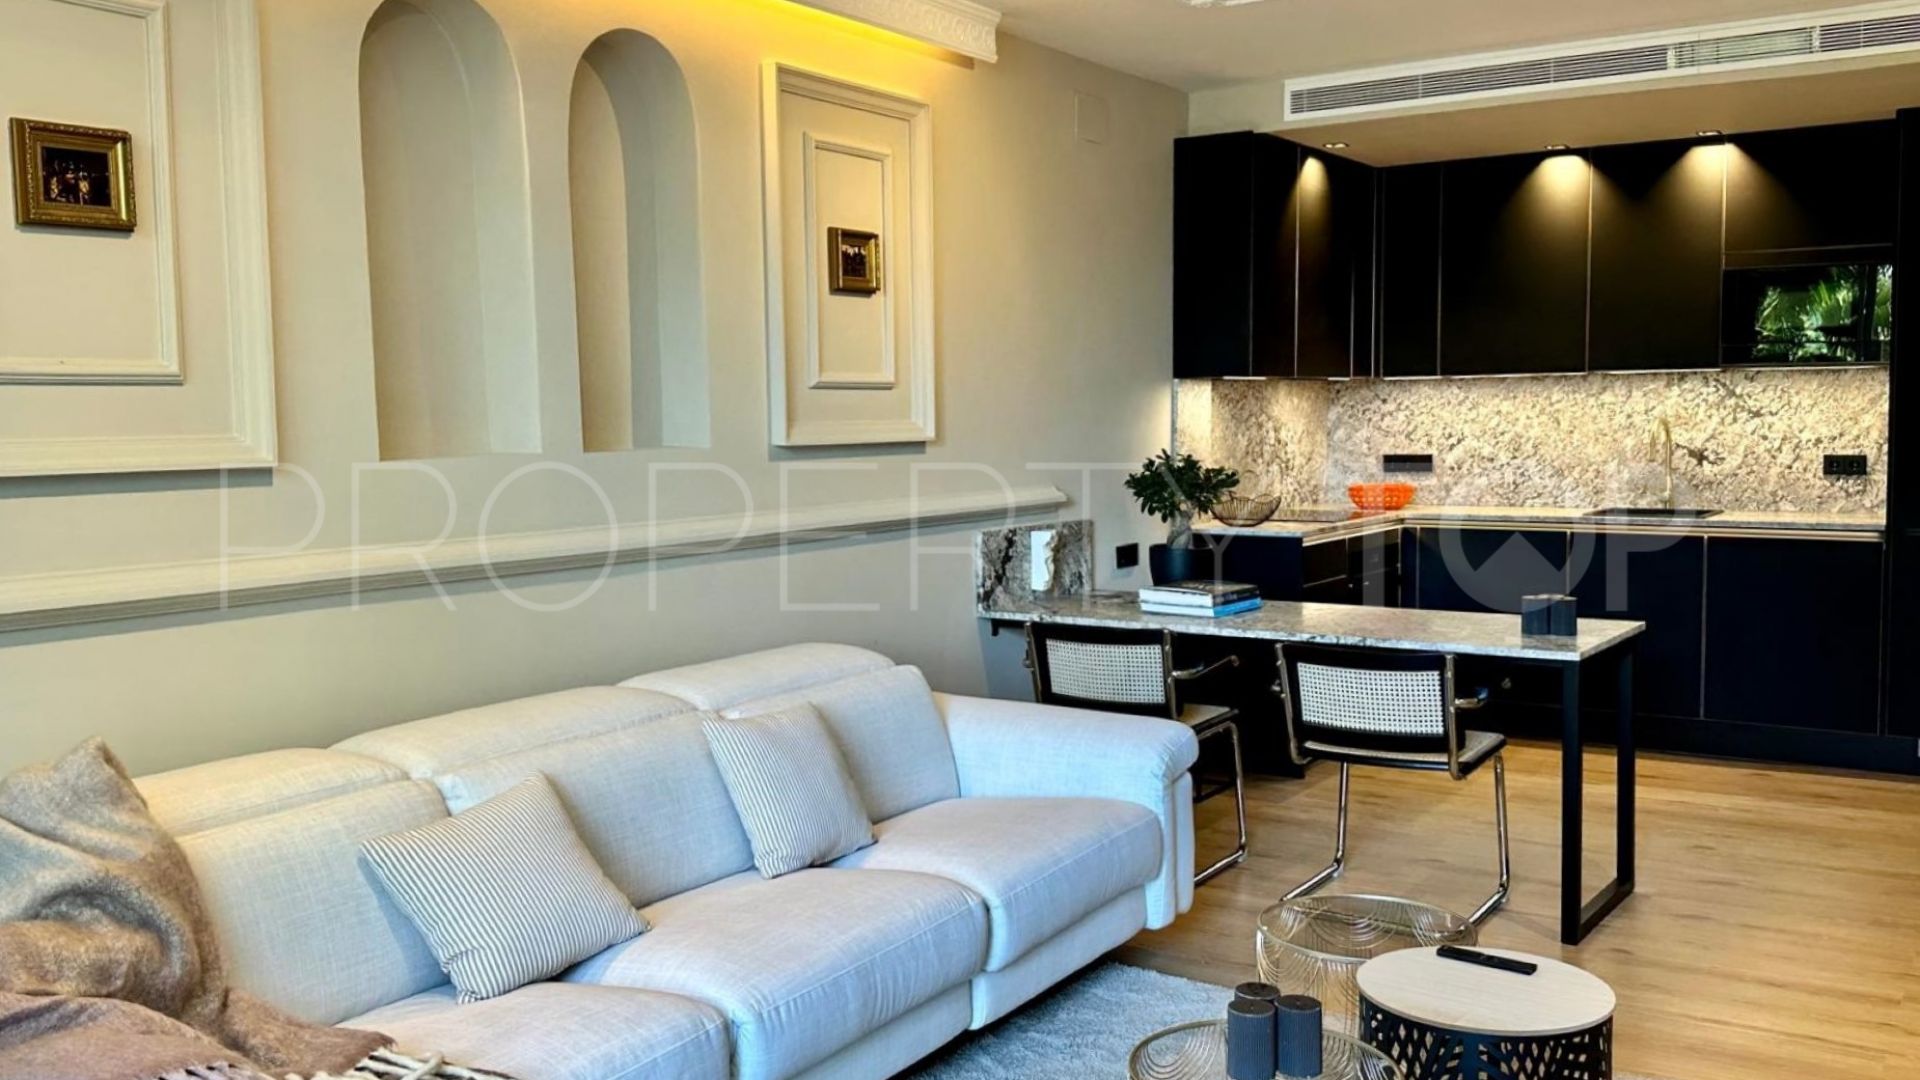 For sale ground floor apartment in Marina Puente Romano with 1 bedroom